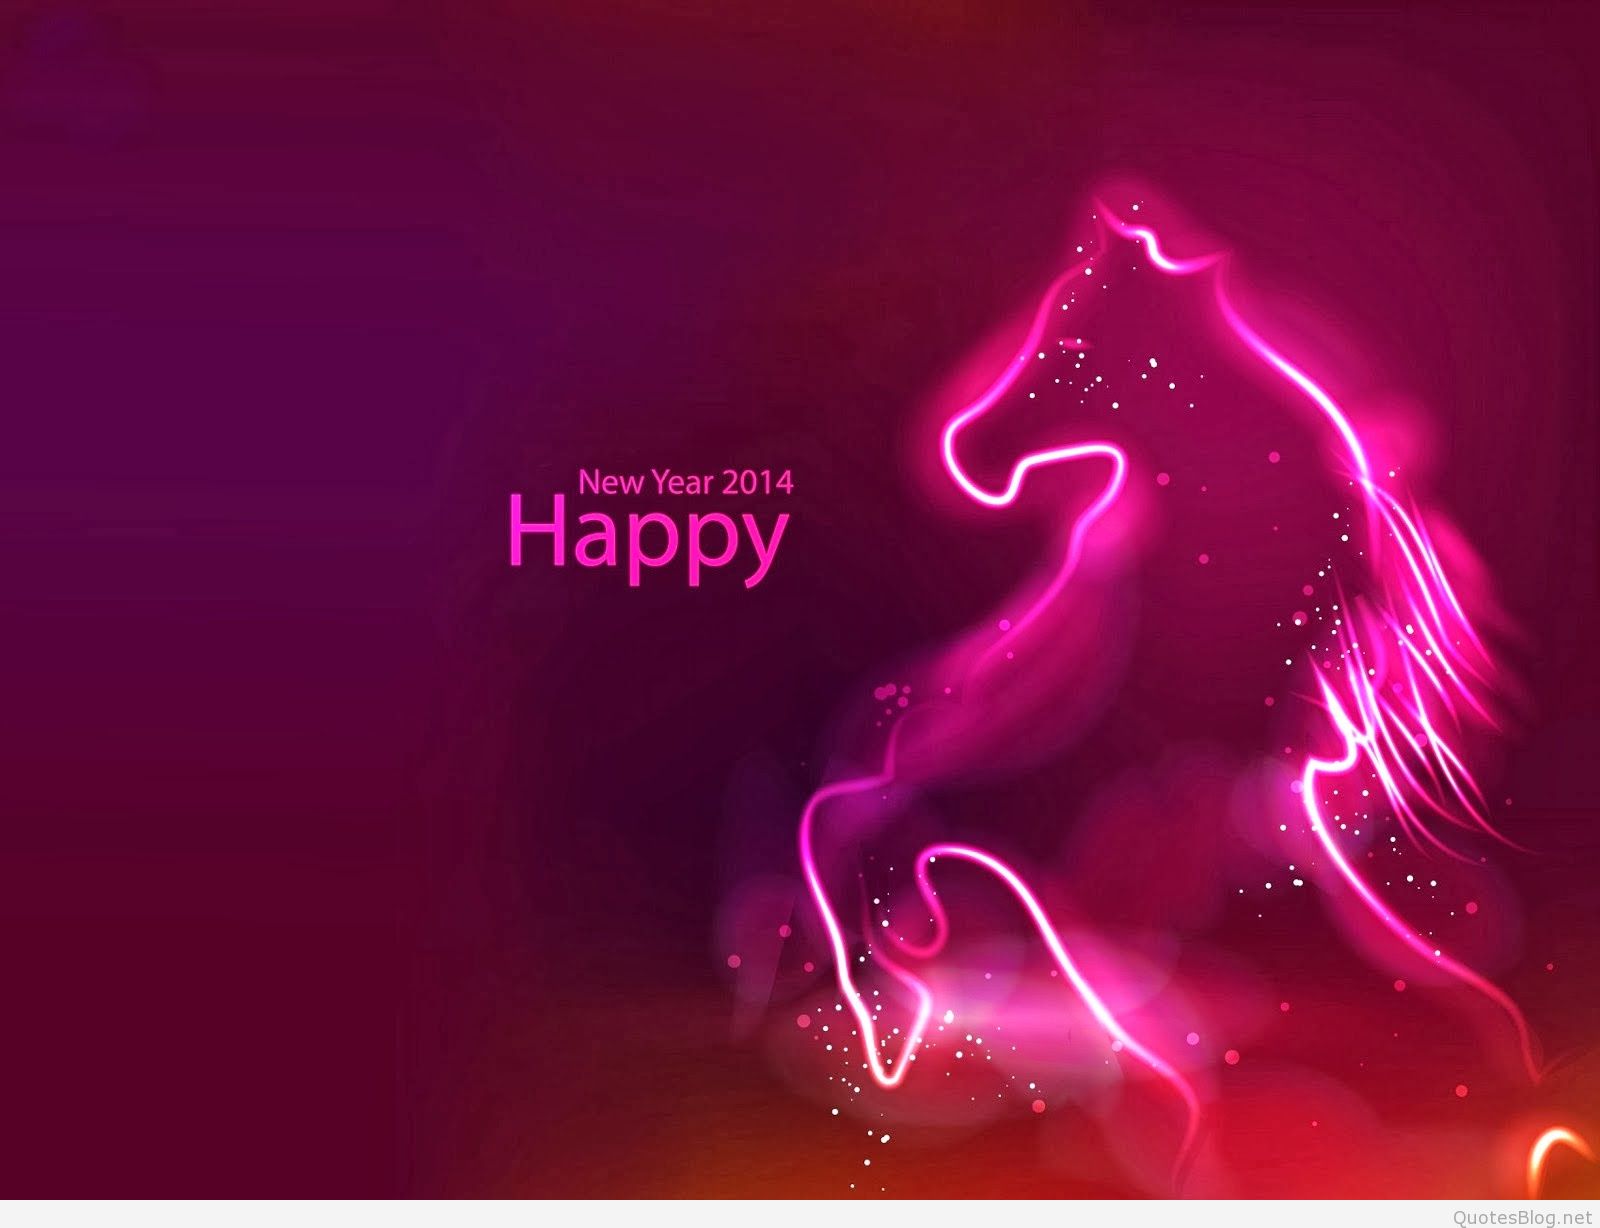 Tet New Year Wishes Image Happy Lunar New Year 2014 - Horse Pic With New Year Wishes - HD Wallpaper 